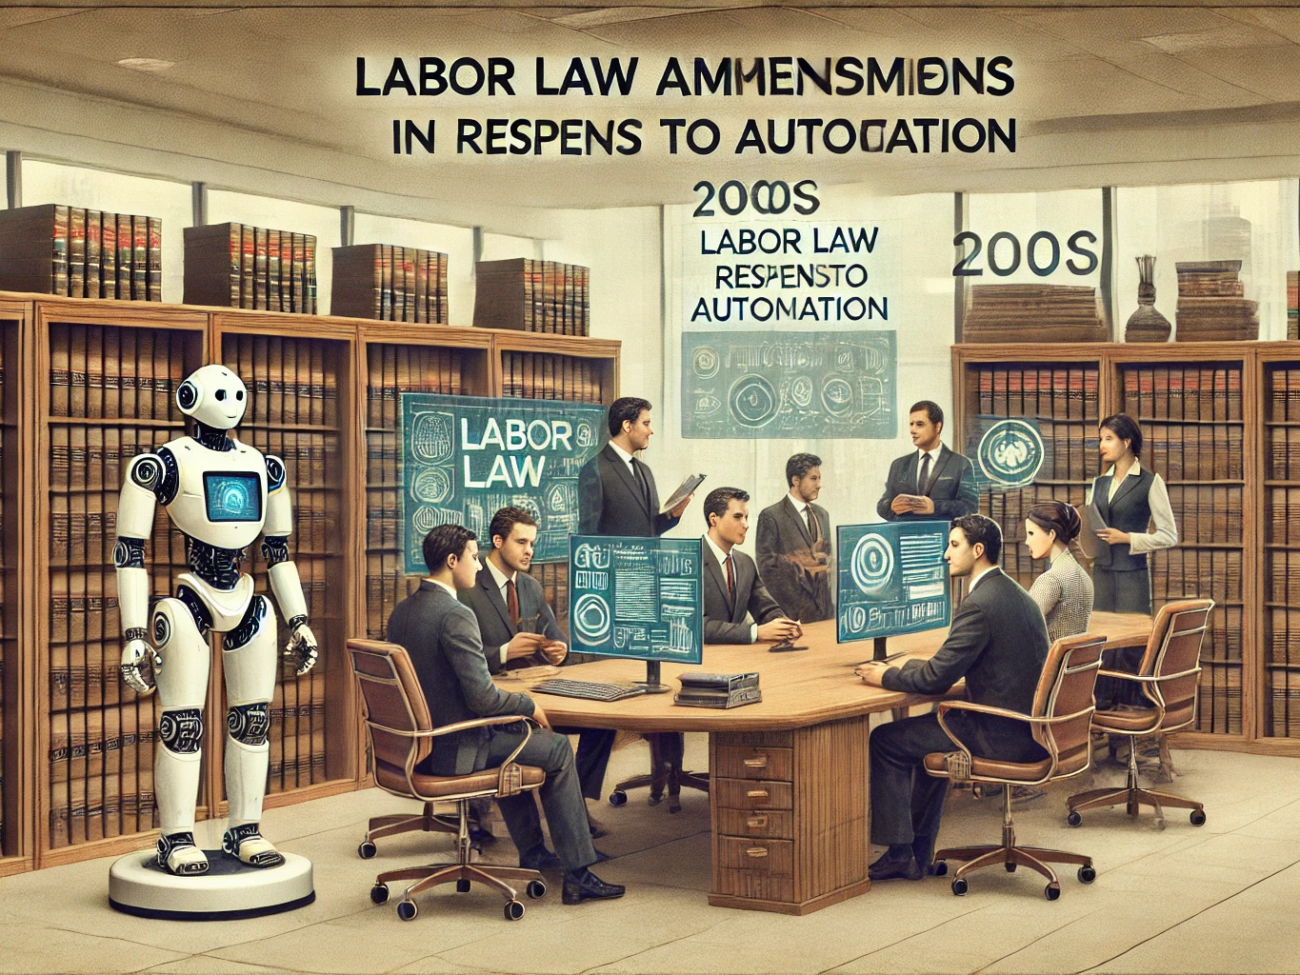 DALL·E 2024-06-29 09.49.28 - A 2000s style legal office environment with muted colors, showcasing discussions on labor law amendments in response to automation. Lawyers and policy